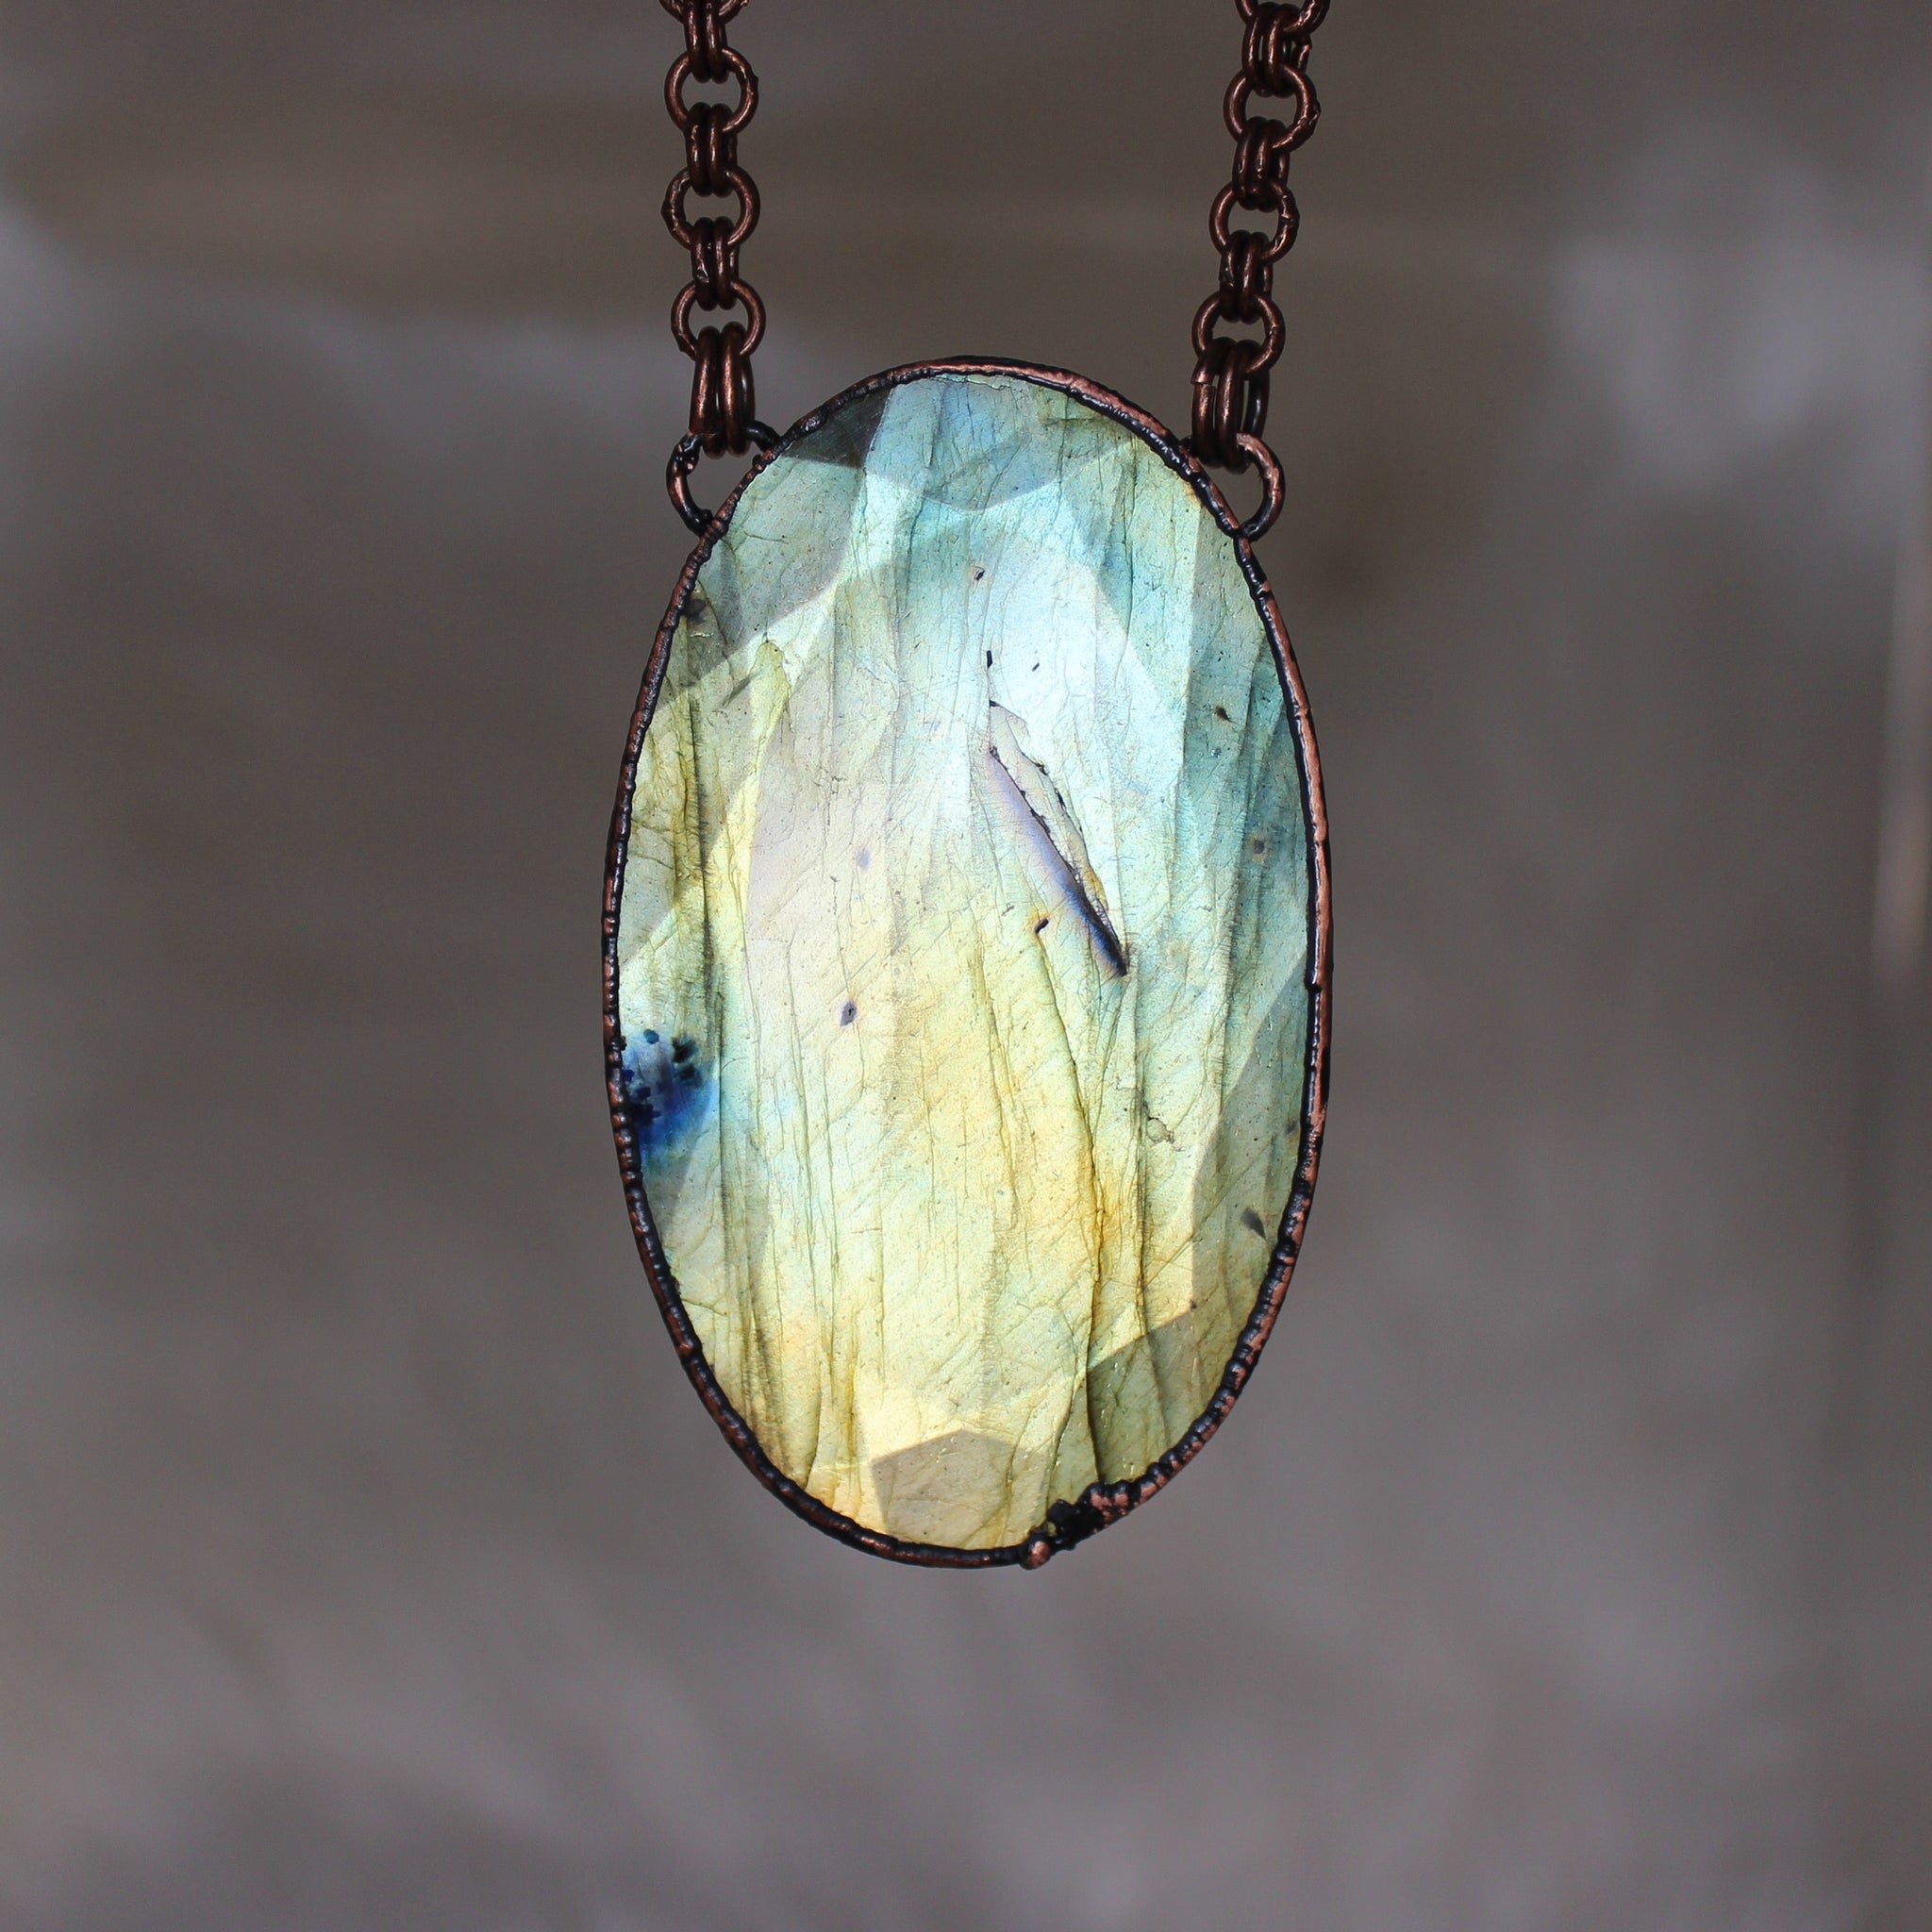 Giant Faceted Labradorite Necklace